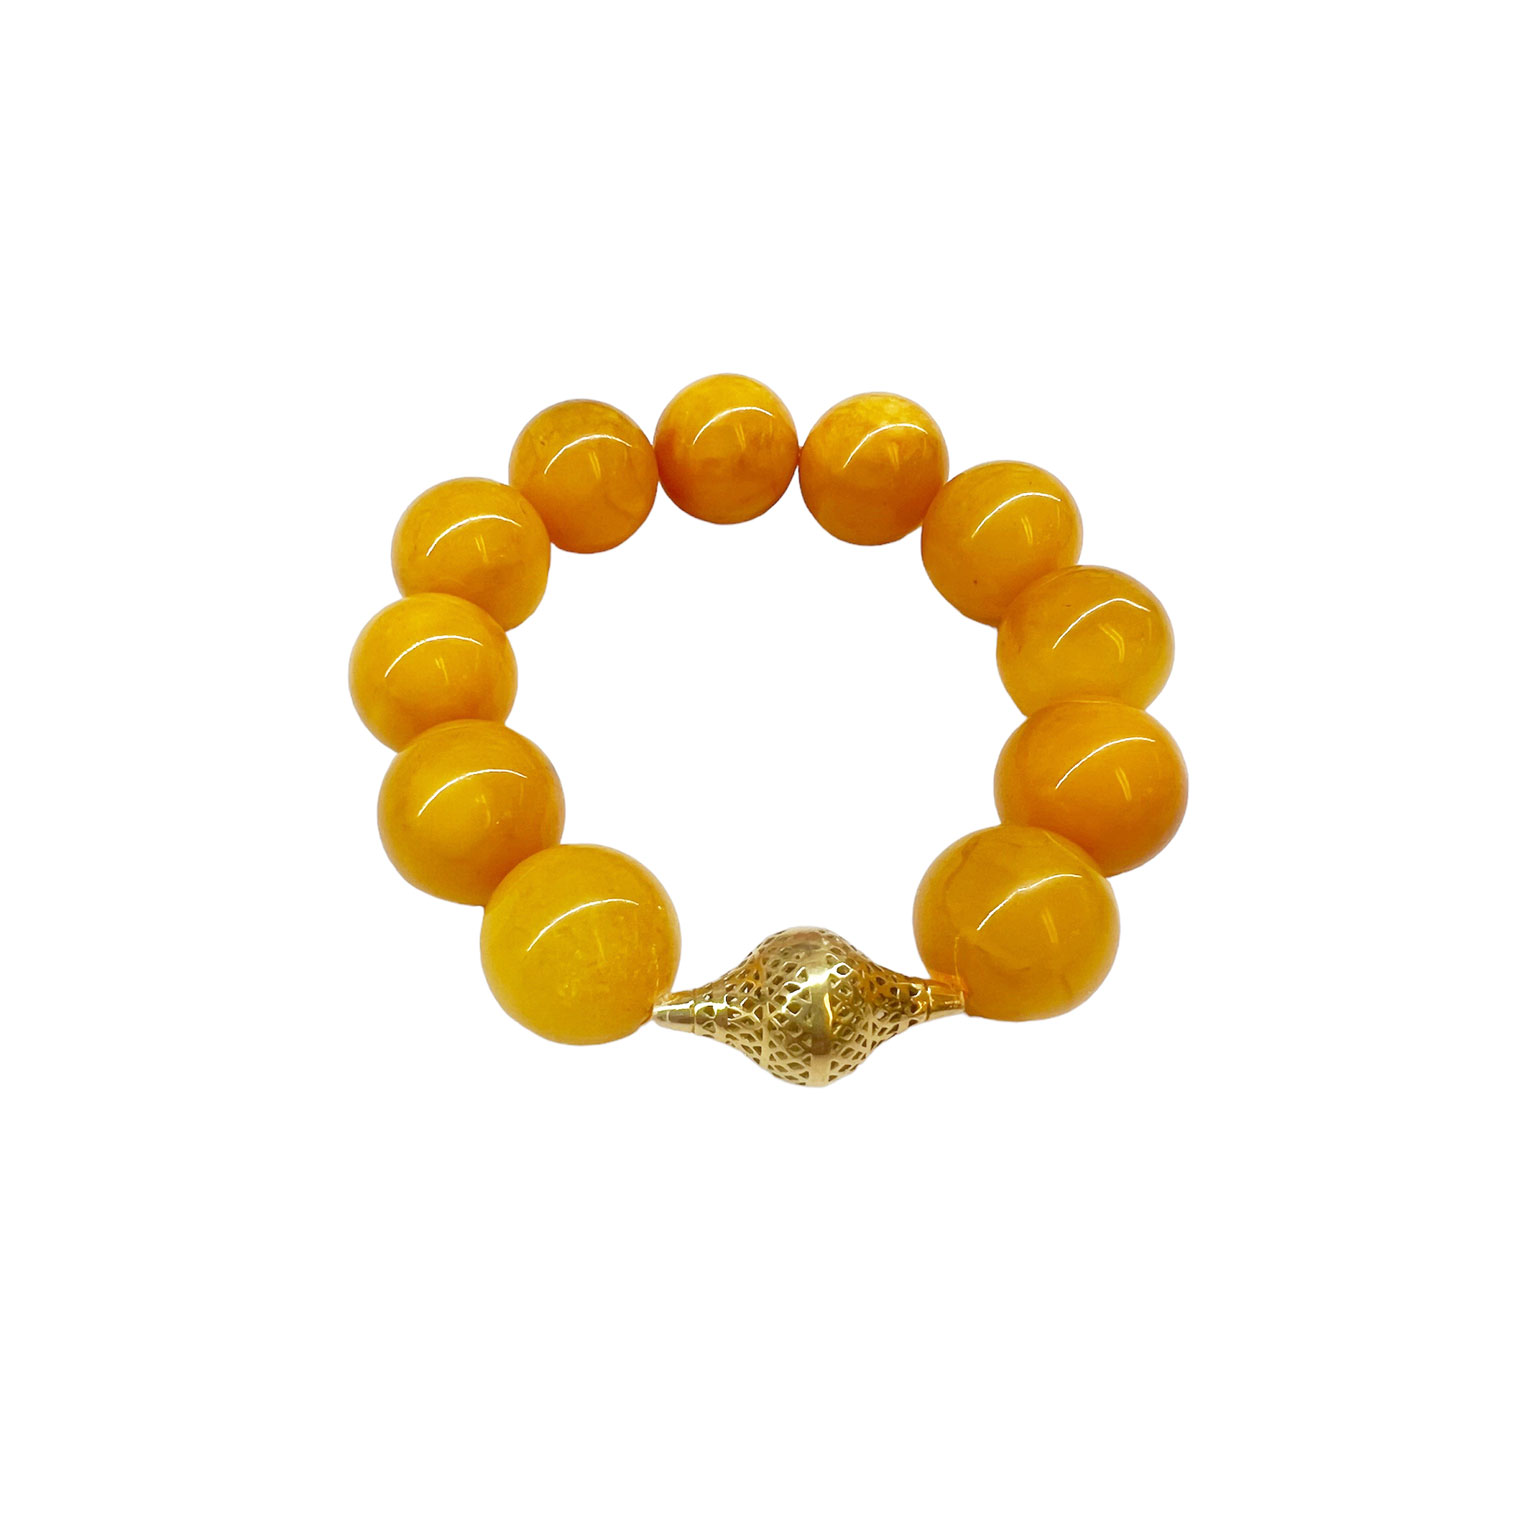 This is a photo of a beaded butterscotch amber bracelet